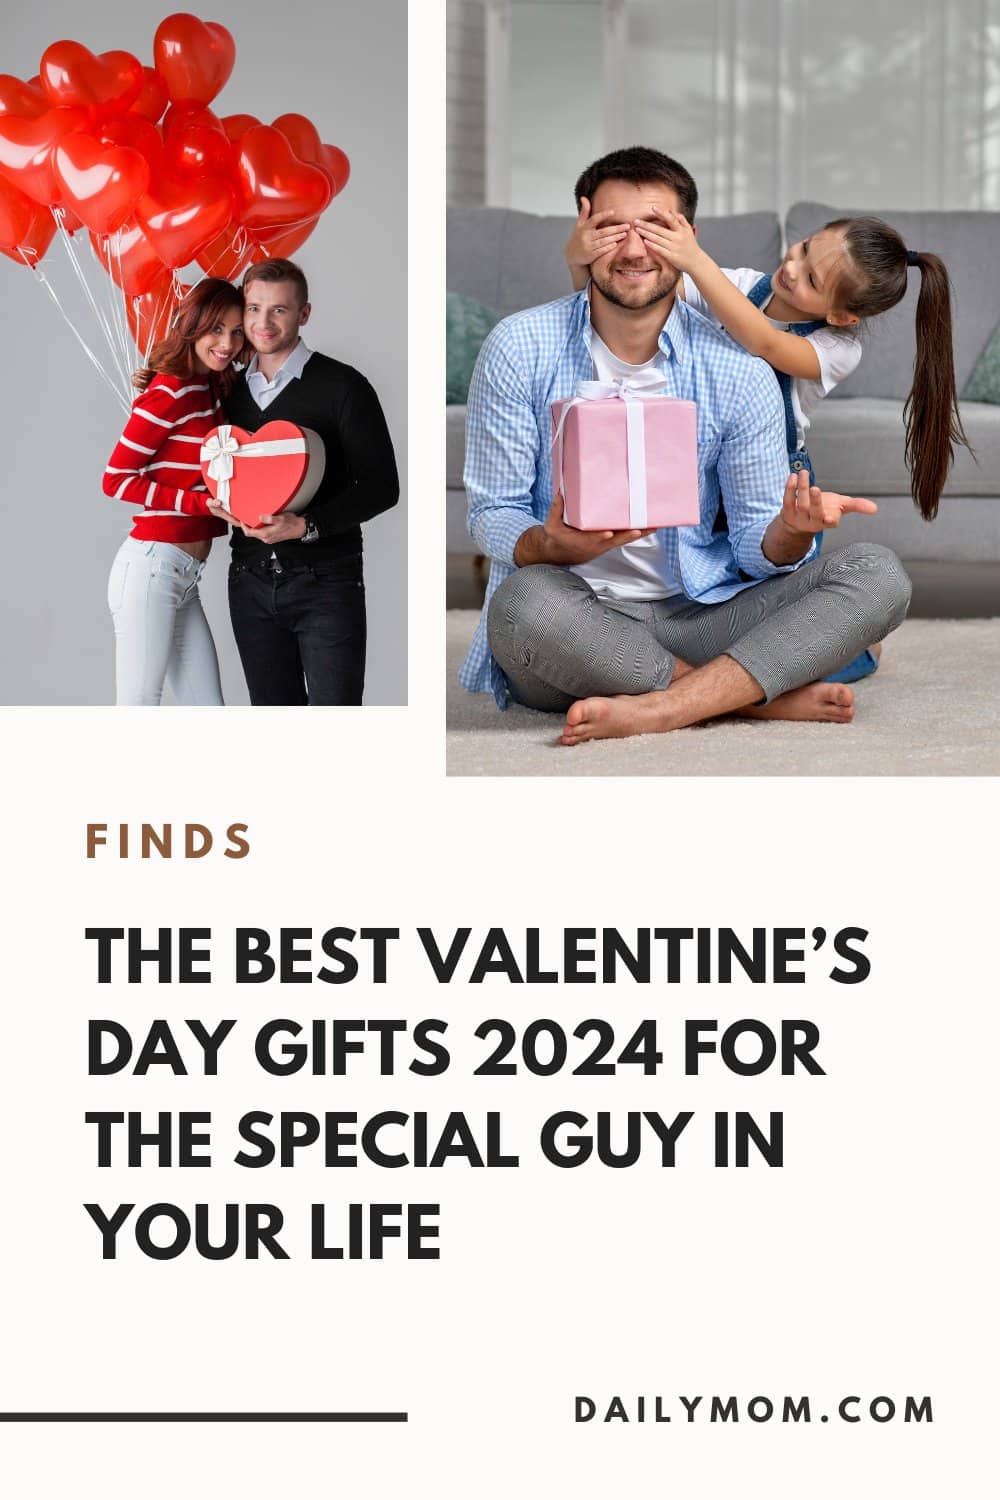 Daily Mom Parent Portal Good Valentine'S Day Presents For Him